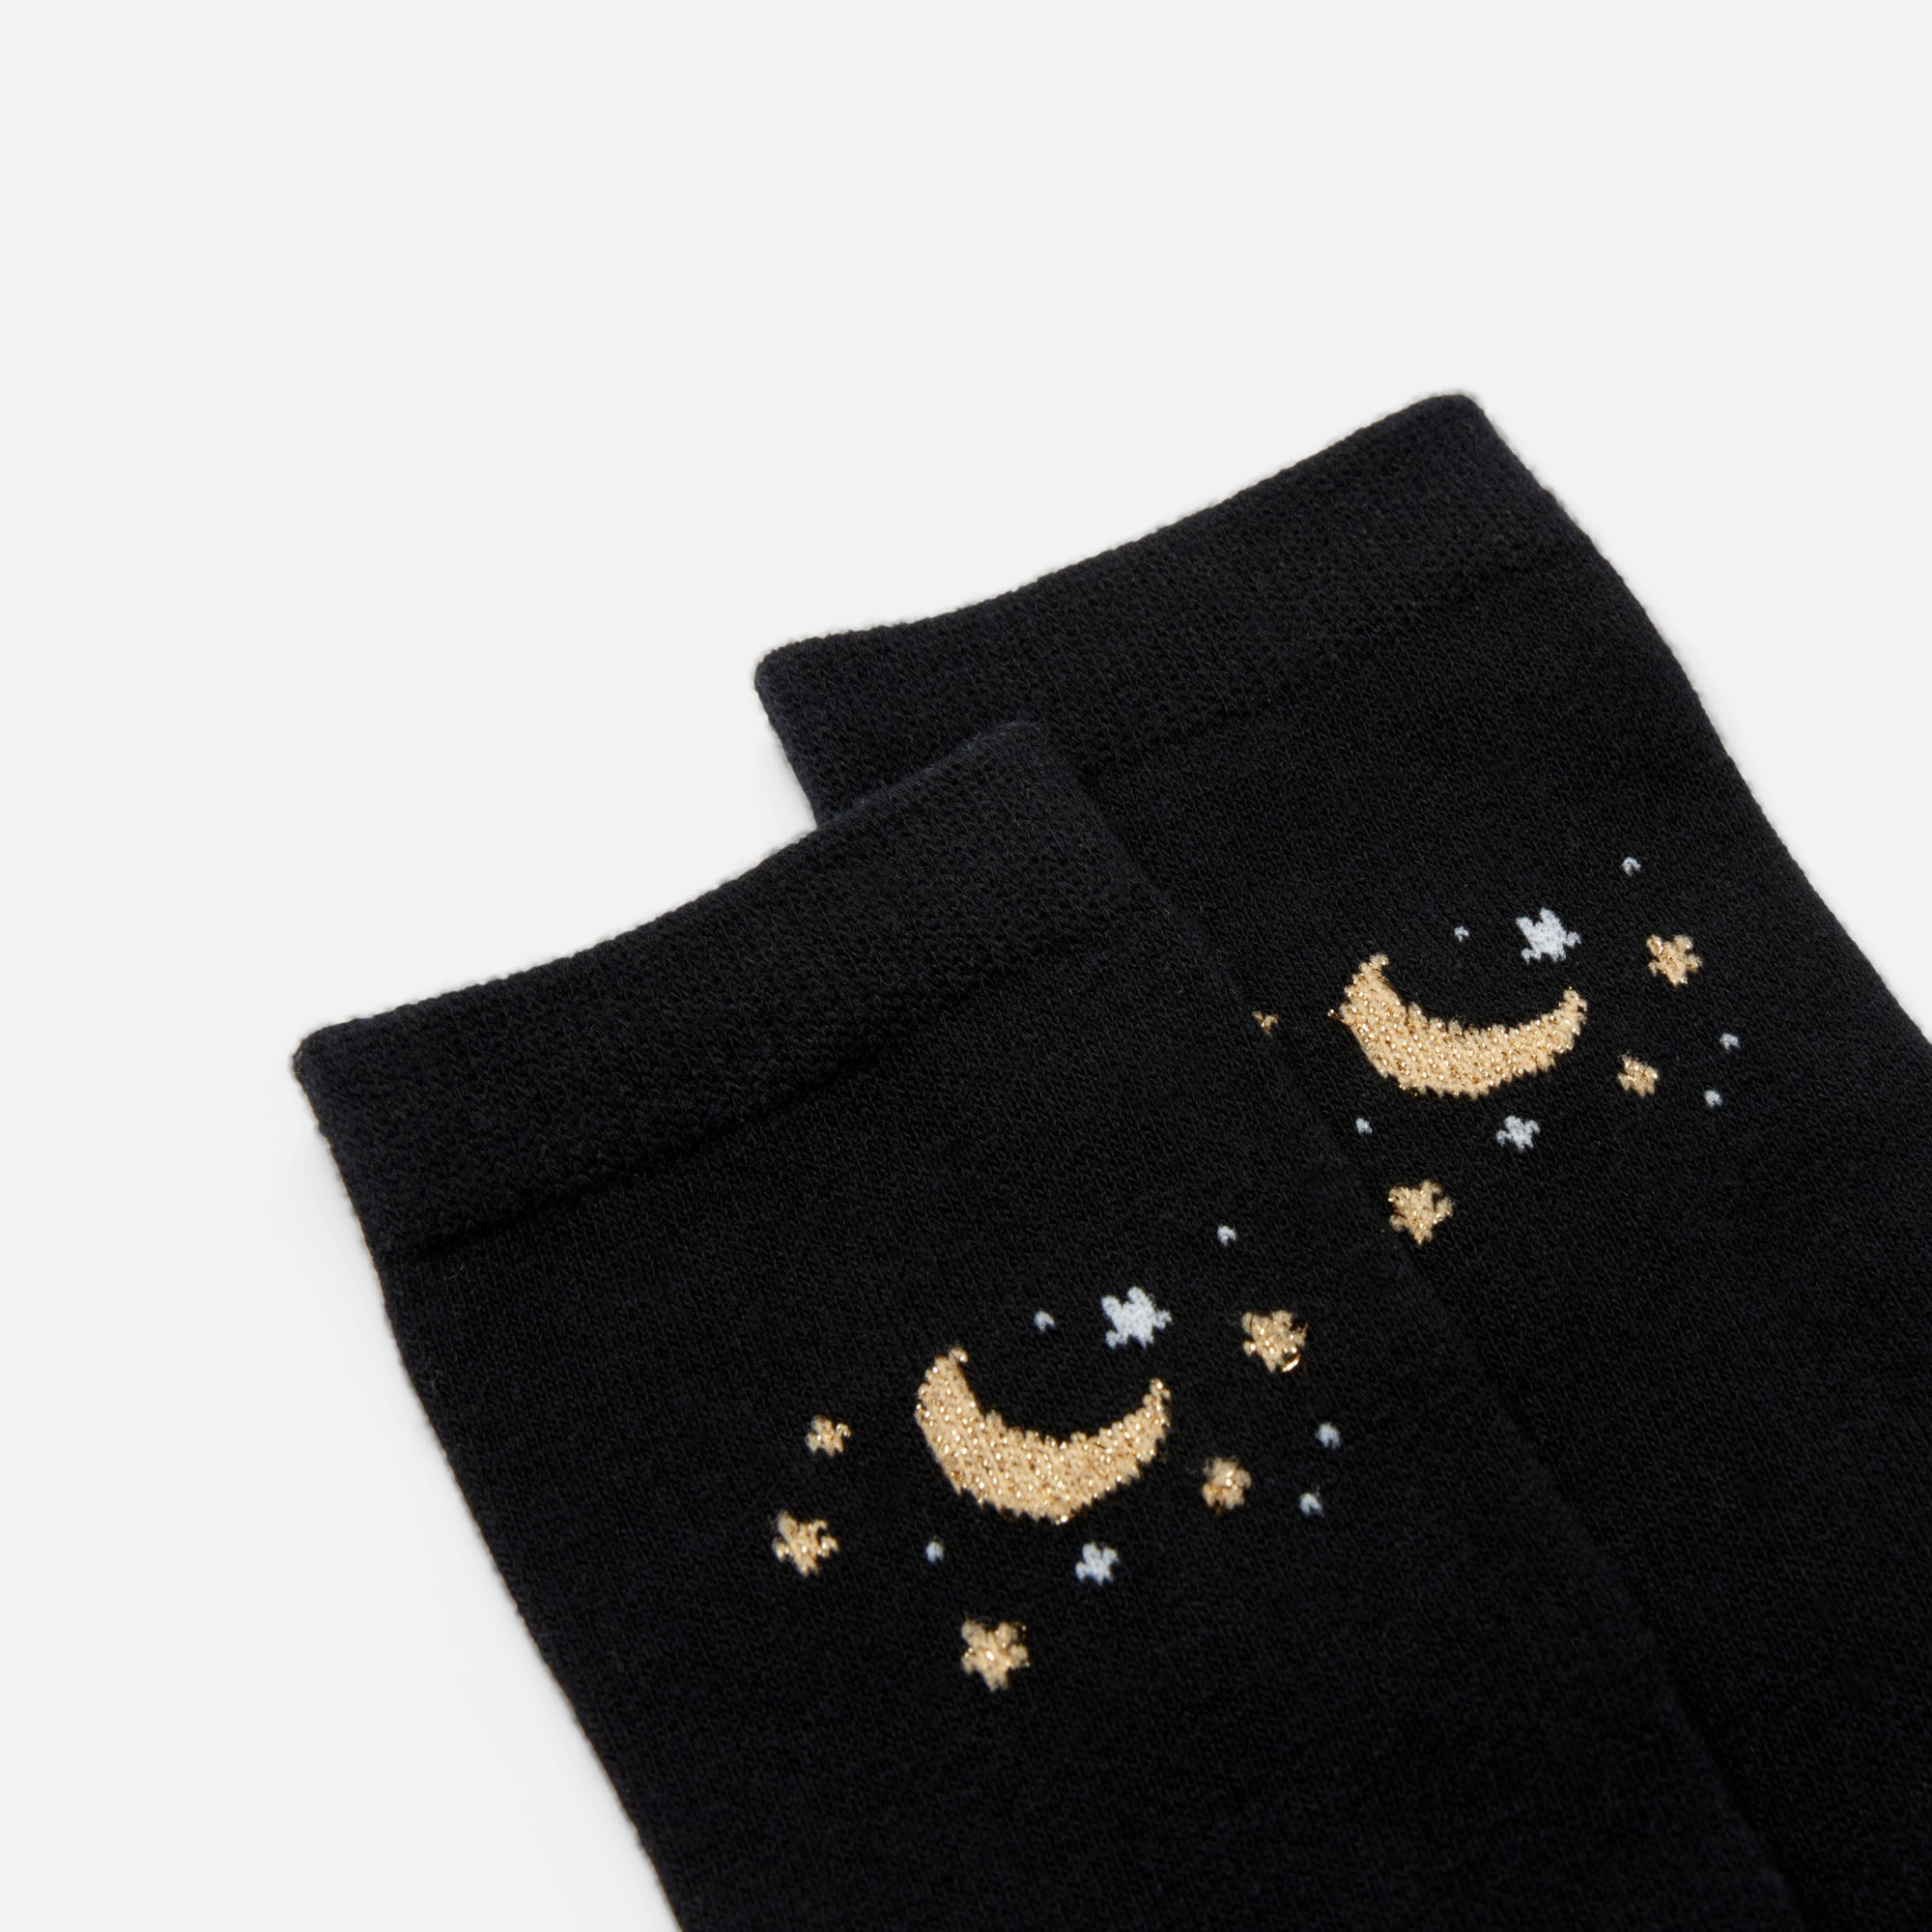 Black socks with golden moon and stars 